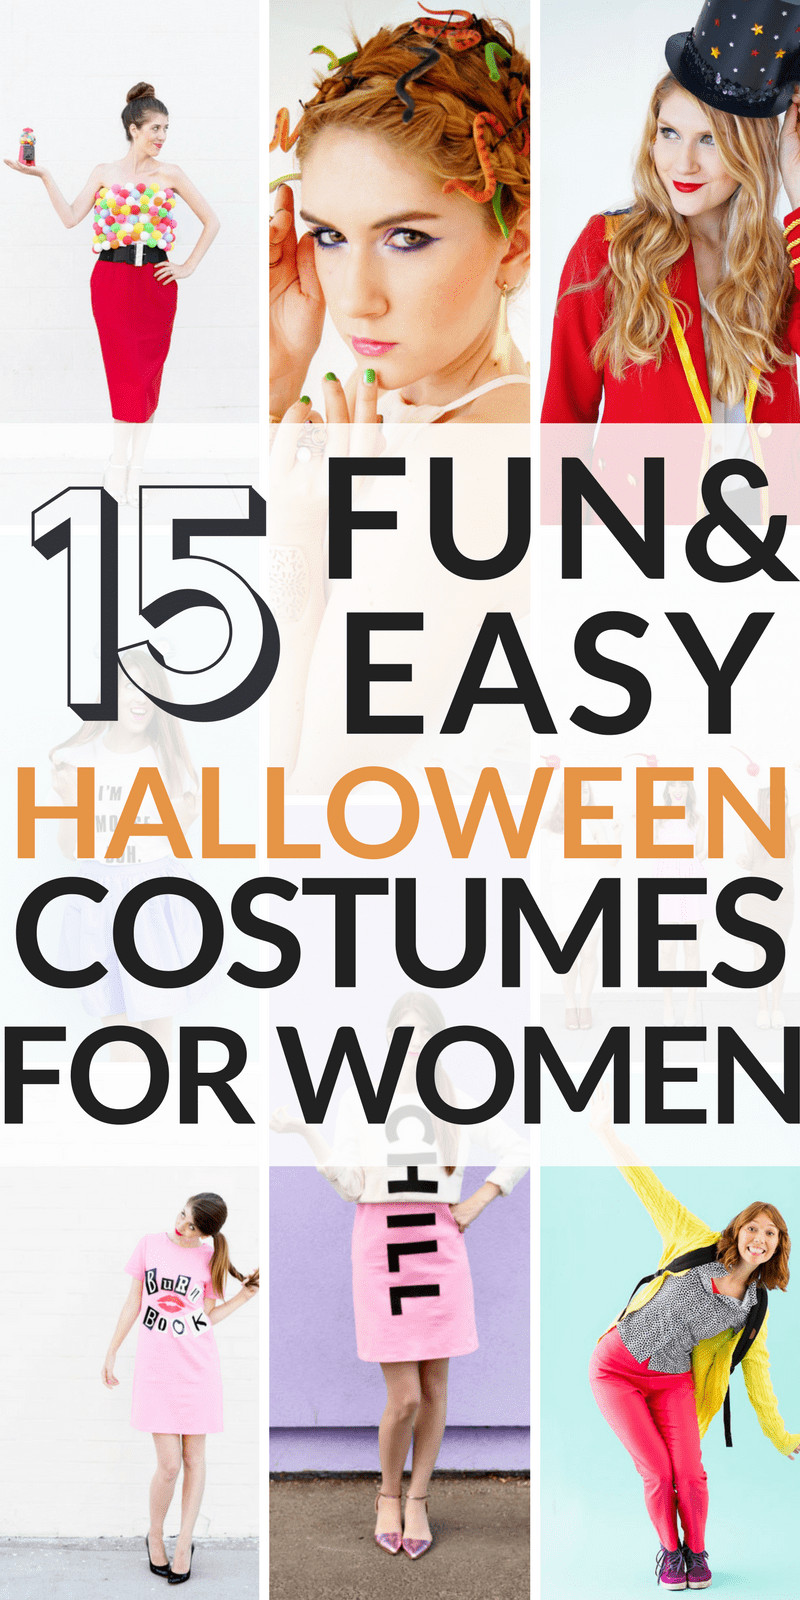 Easy DIY Halloween Costumes For Adults
 15 Cheap and Easy DIY Halloween Costumes for Women